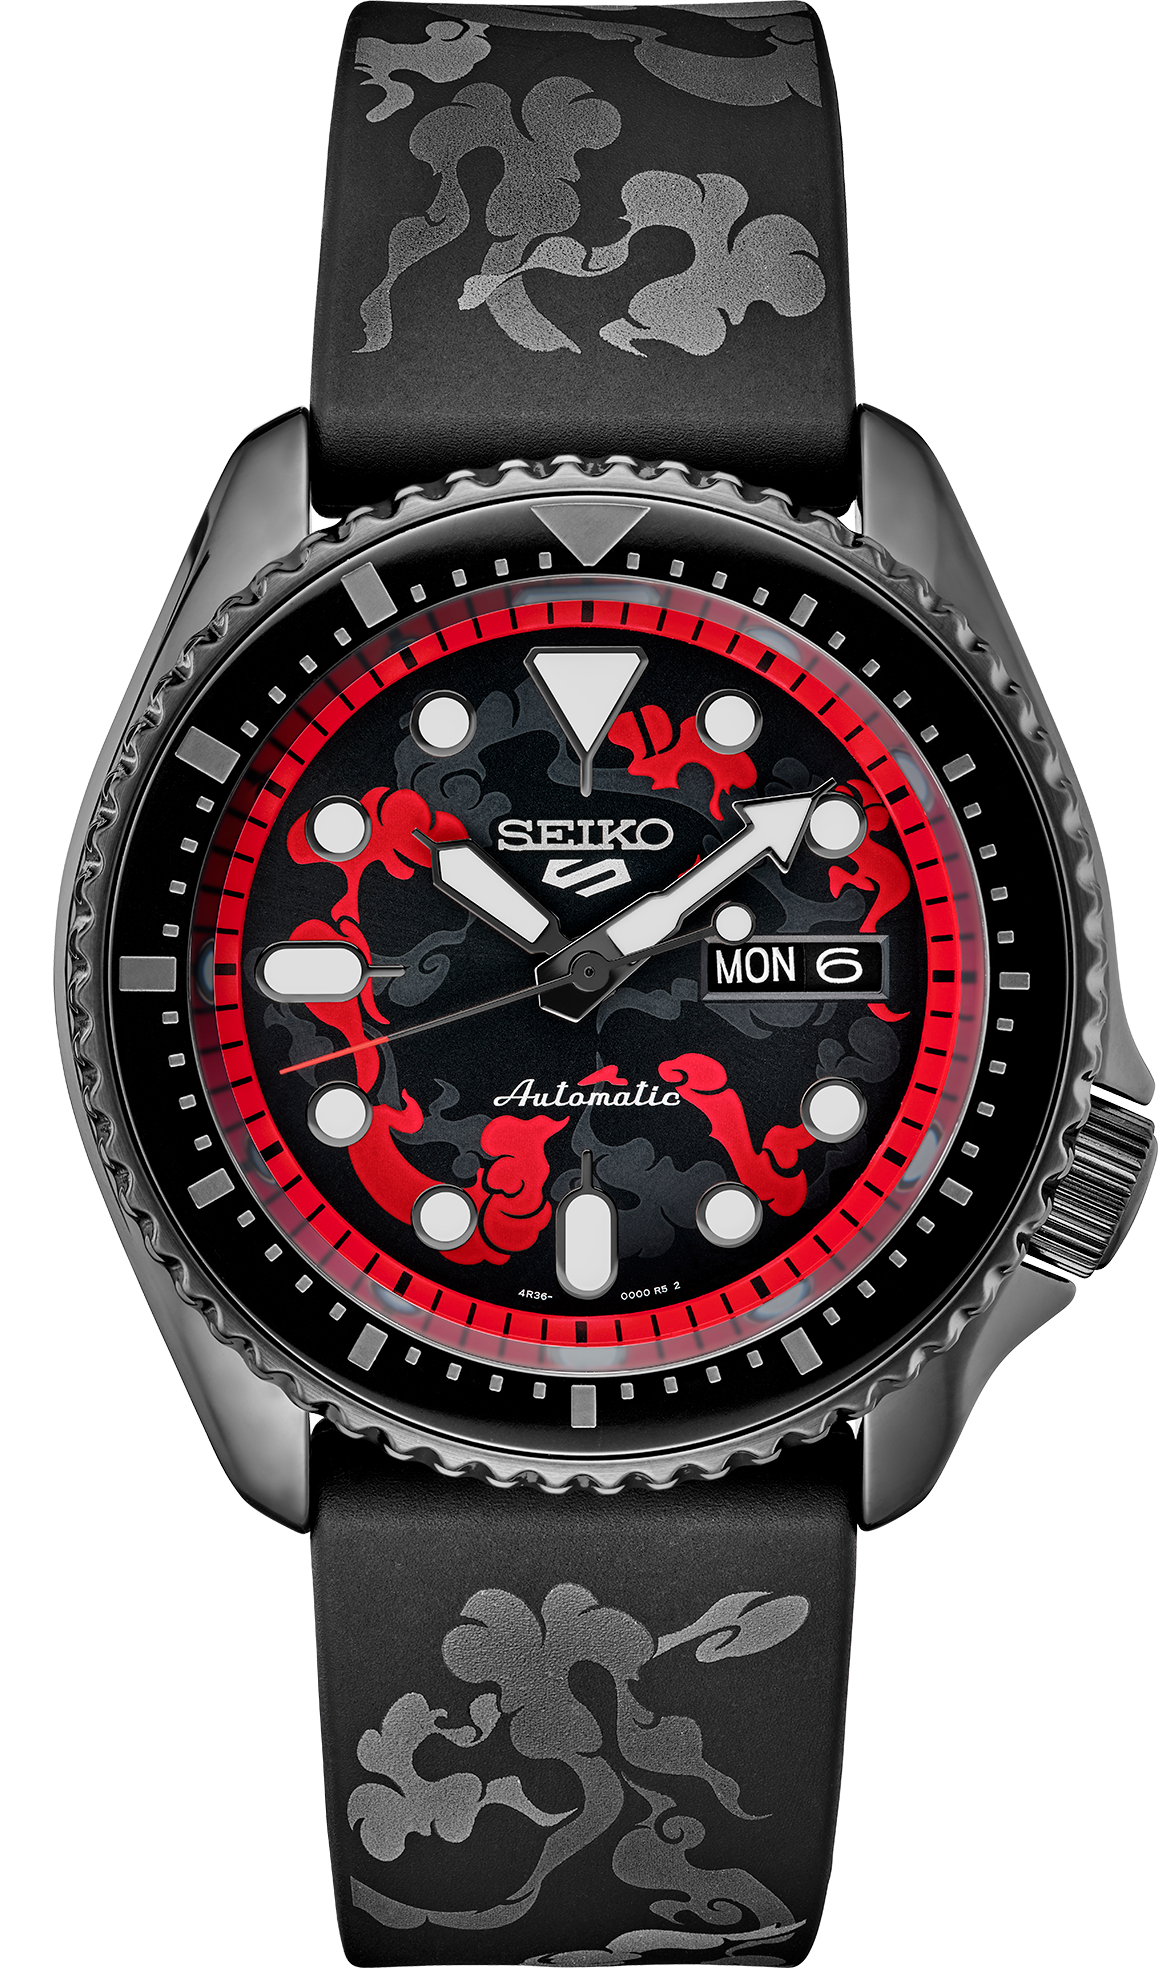 SRPH65 Seiko 5 Sports One Piece Monkey D. Luffy Limited Edition